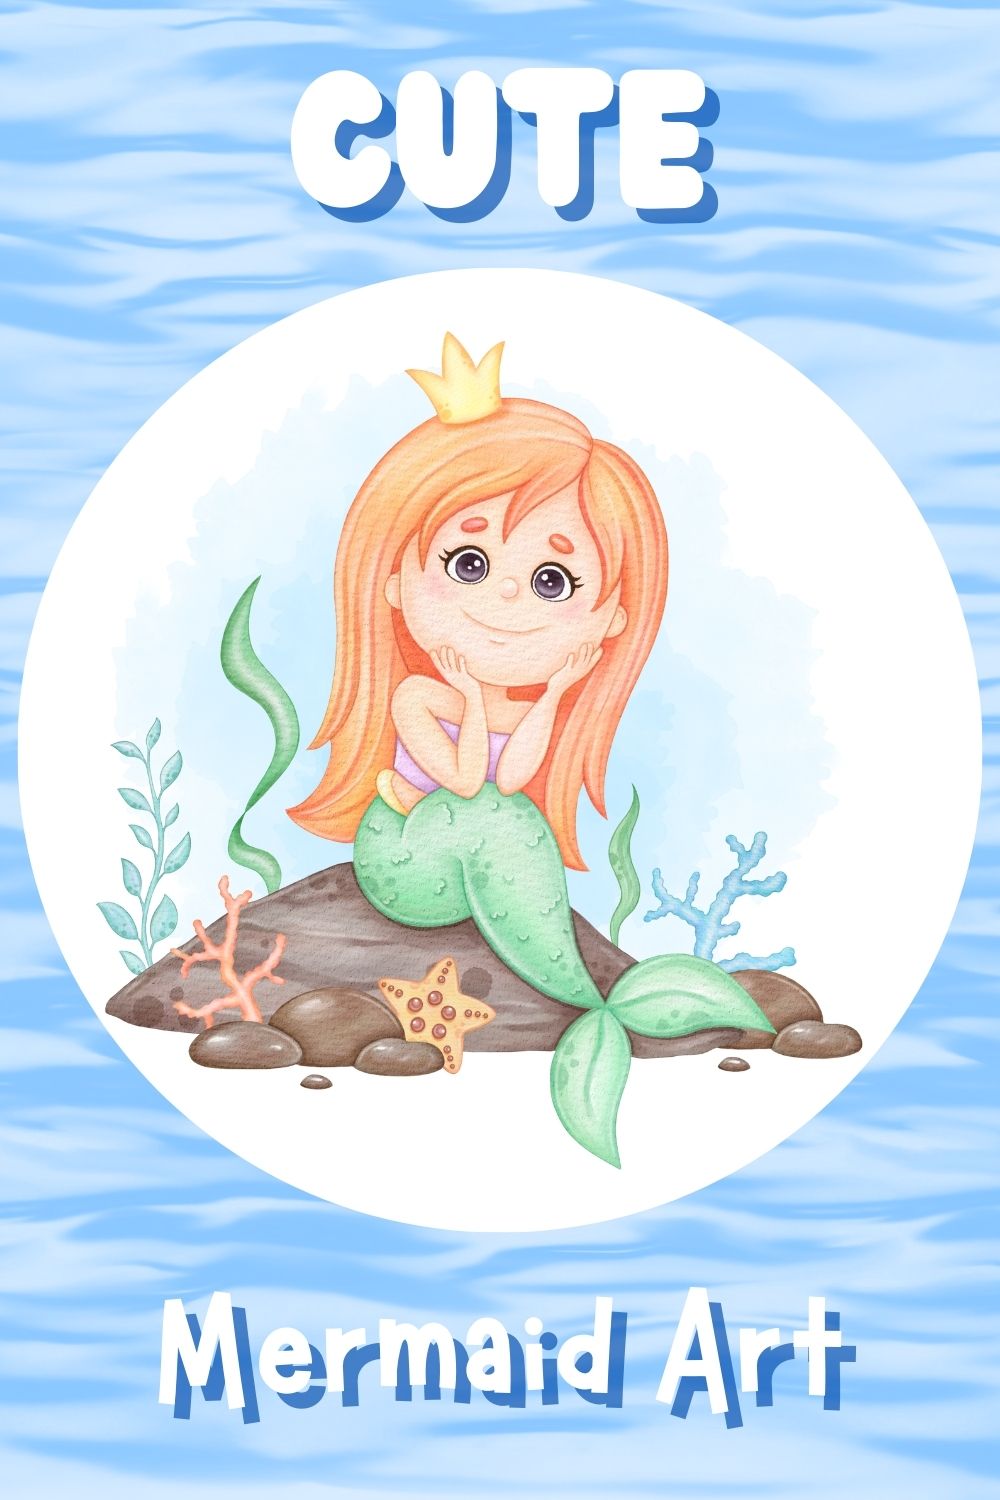 Cute mermaid art posters with inspiring messages make a colorful addition to a girls room or nursery.